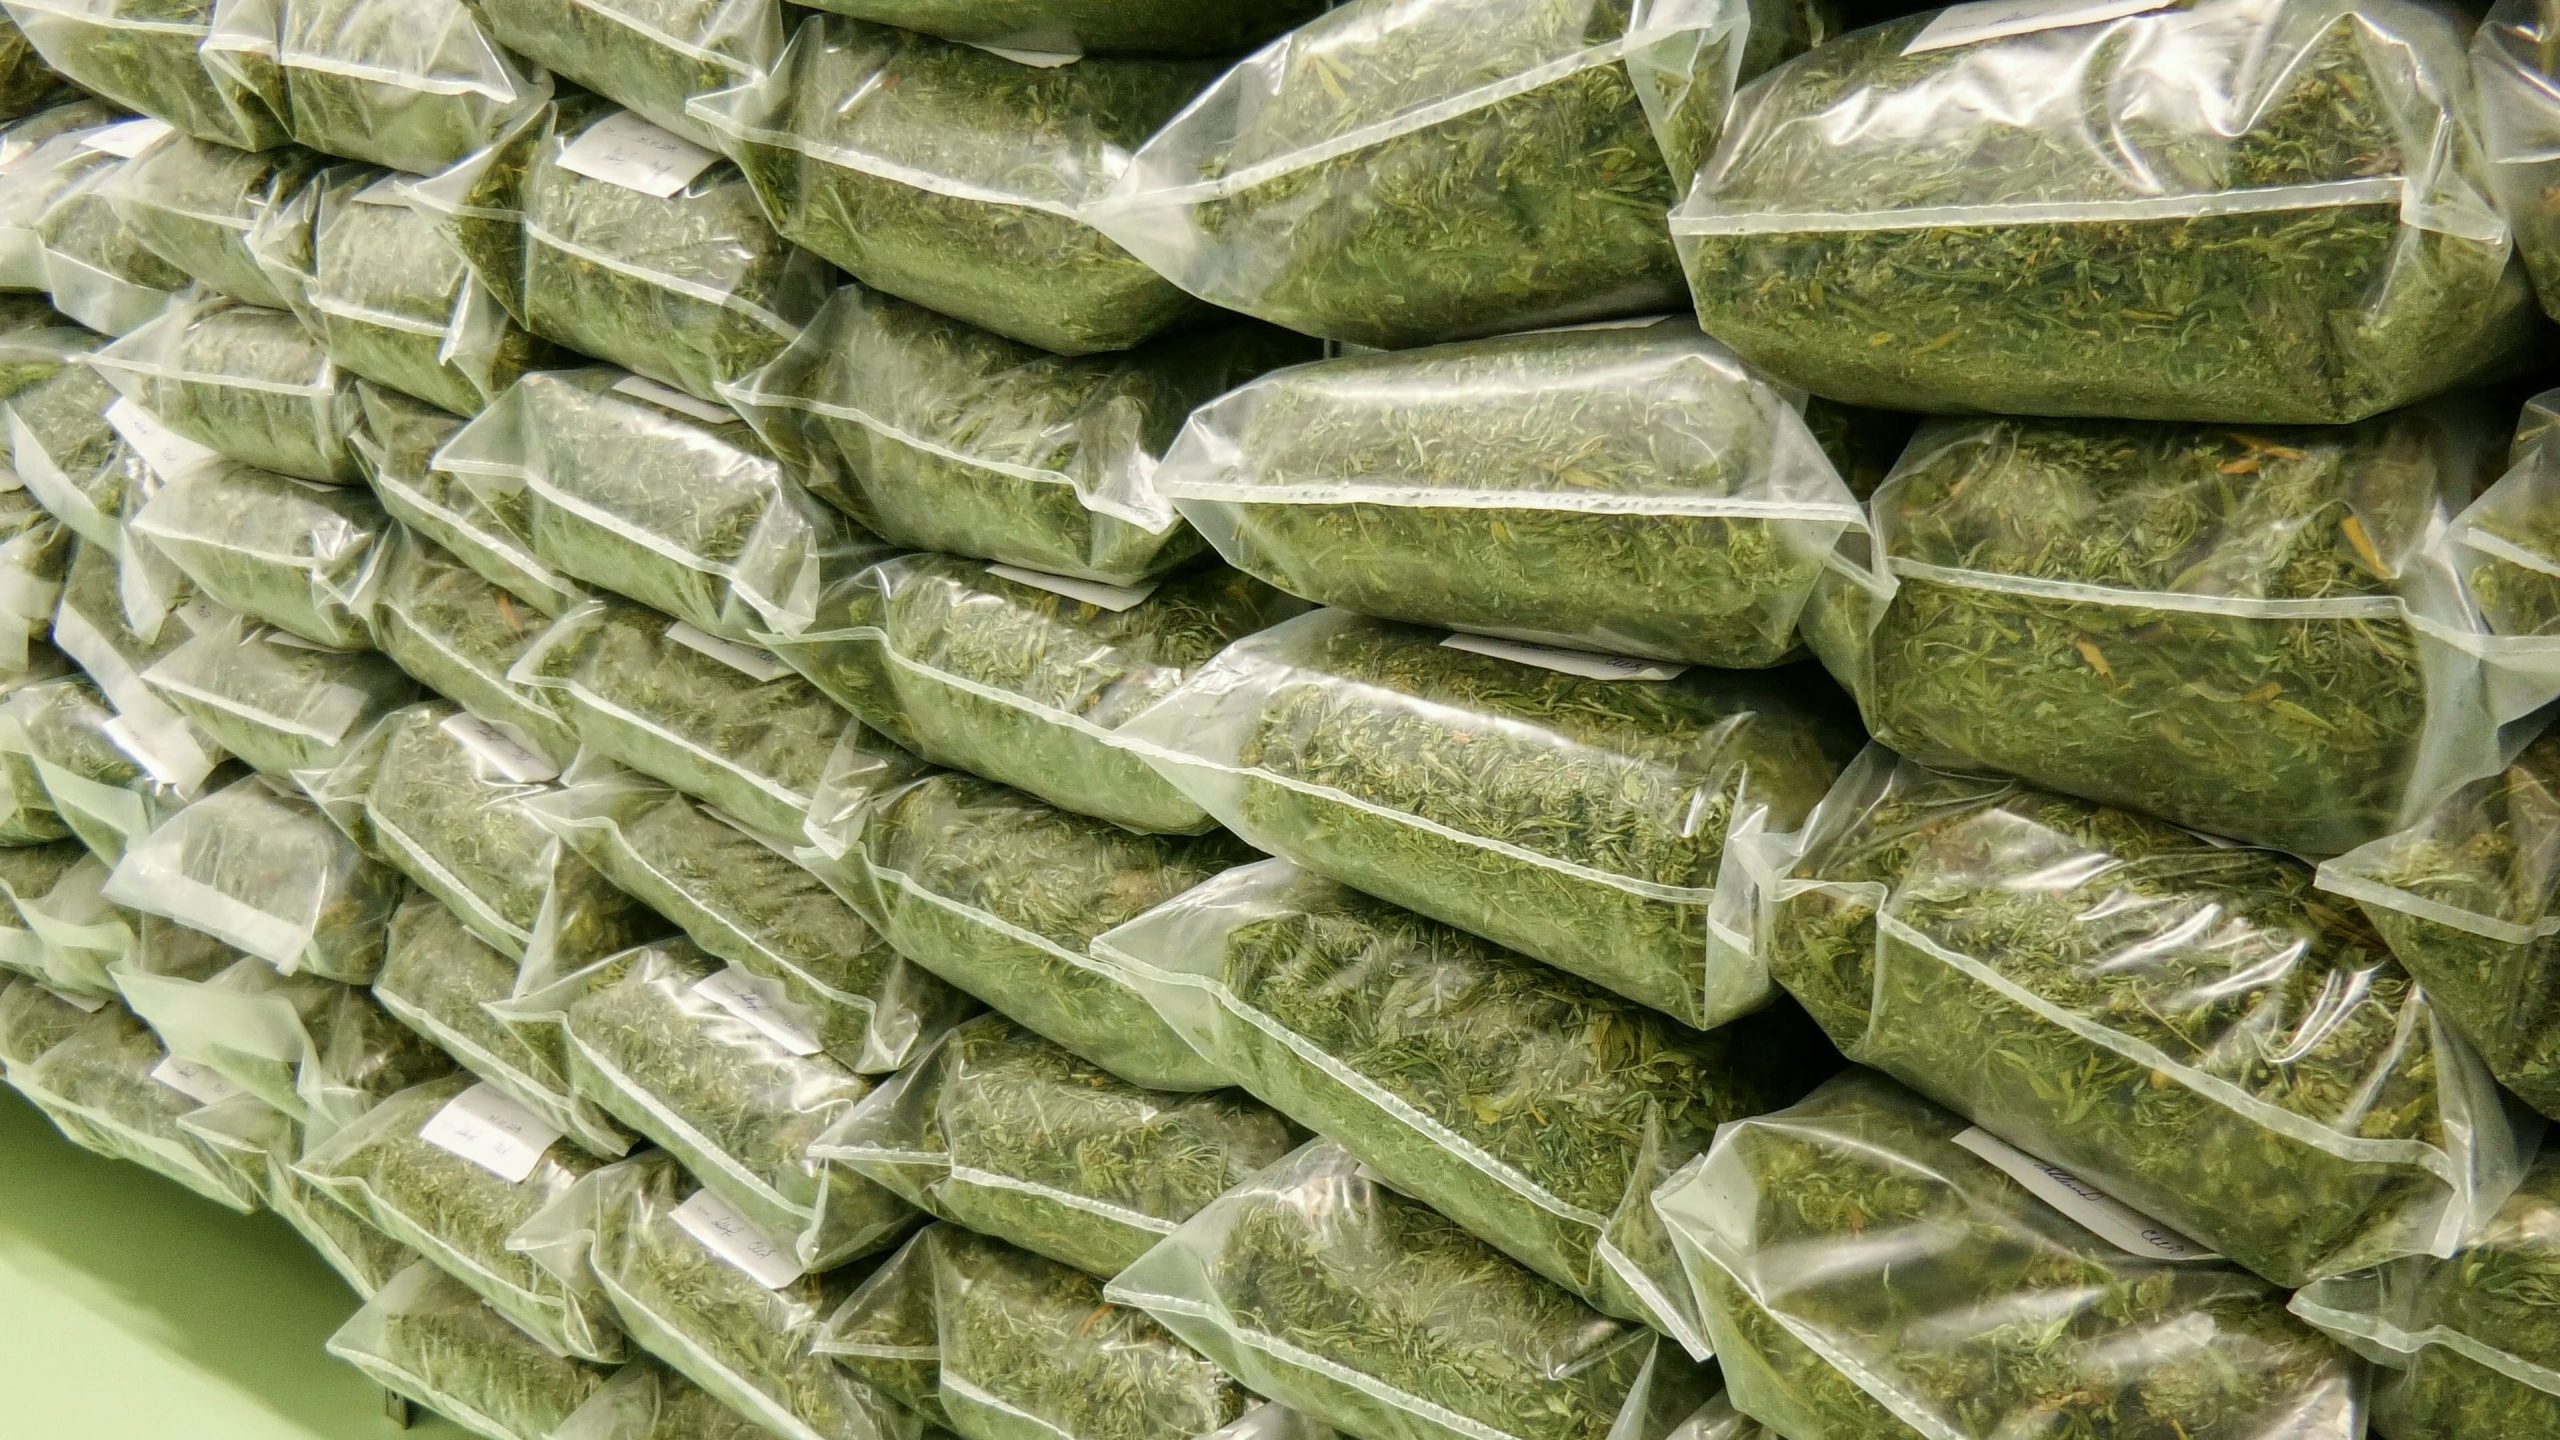 Canada Border Agency Seizes Almost 2,000 Pounds of Illegal Cannabis Export